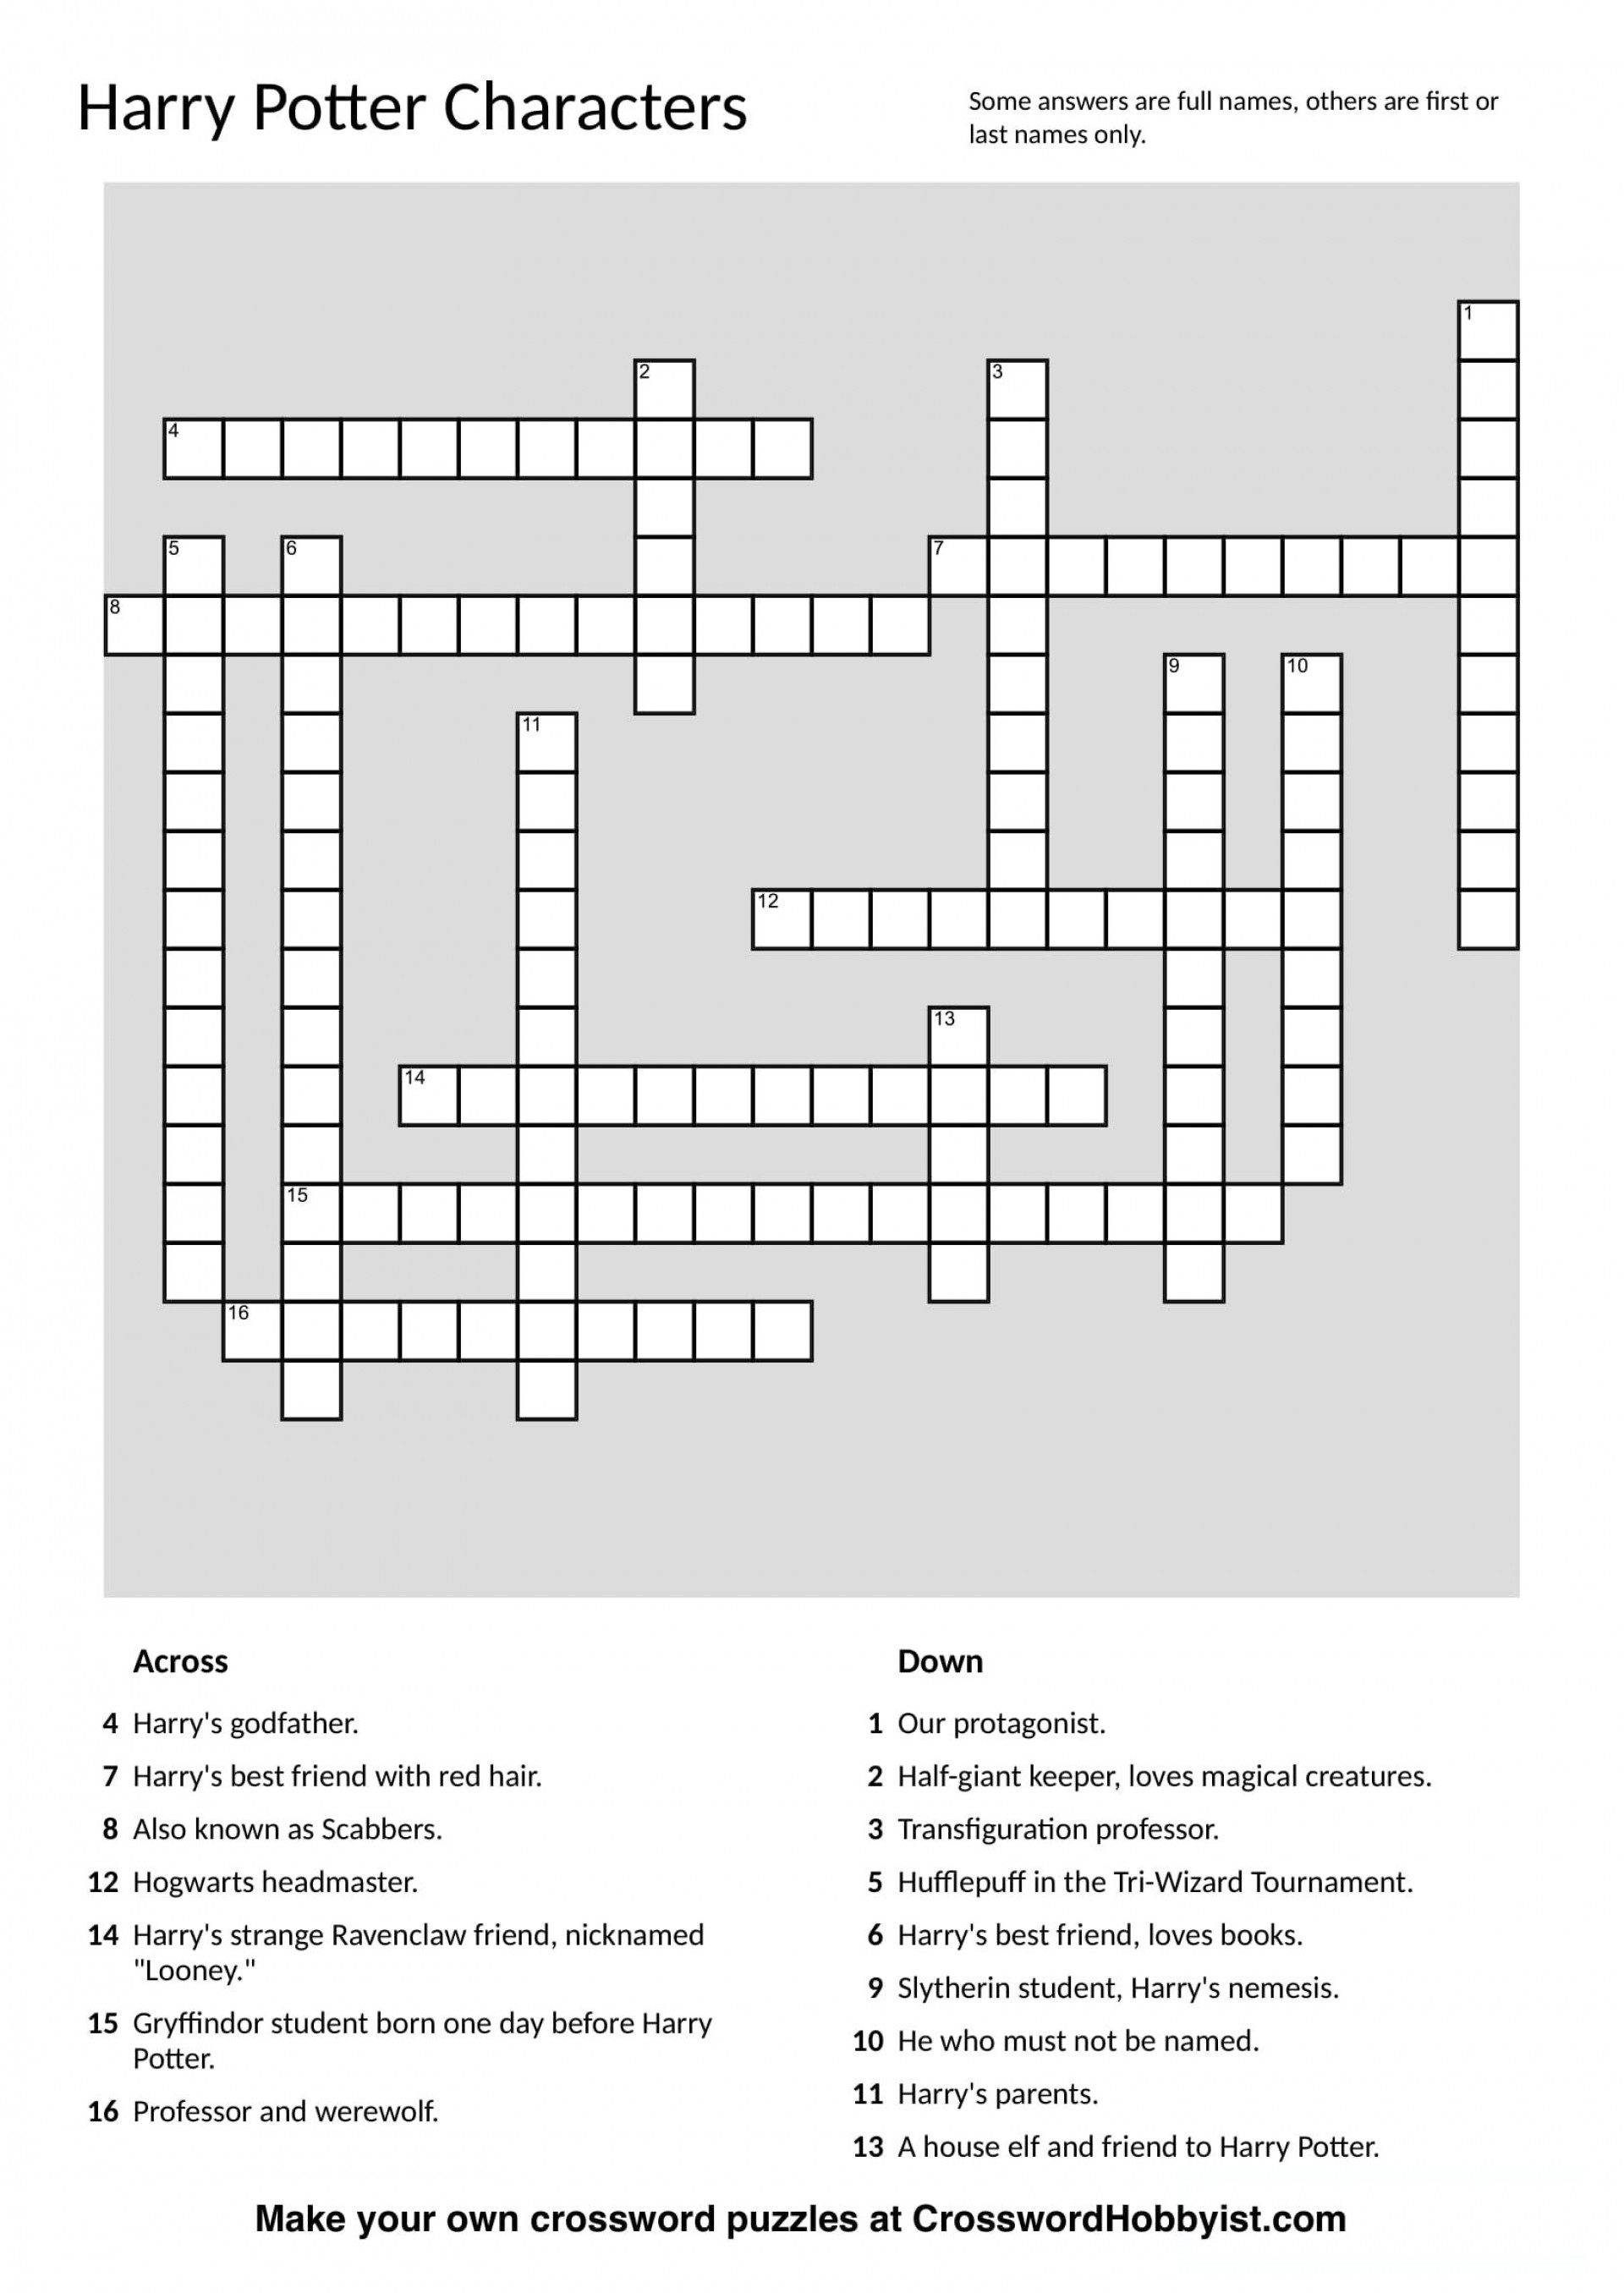 Awesome Crossword Puzzle Make Your Own ~ Themarketonholly - Make Your Own Crossword Puzzle Free Printable